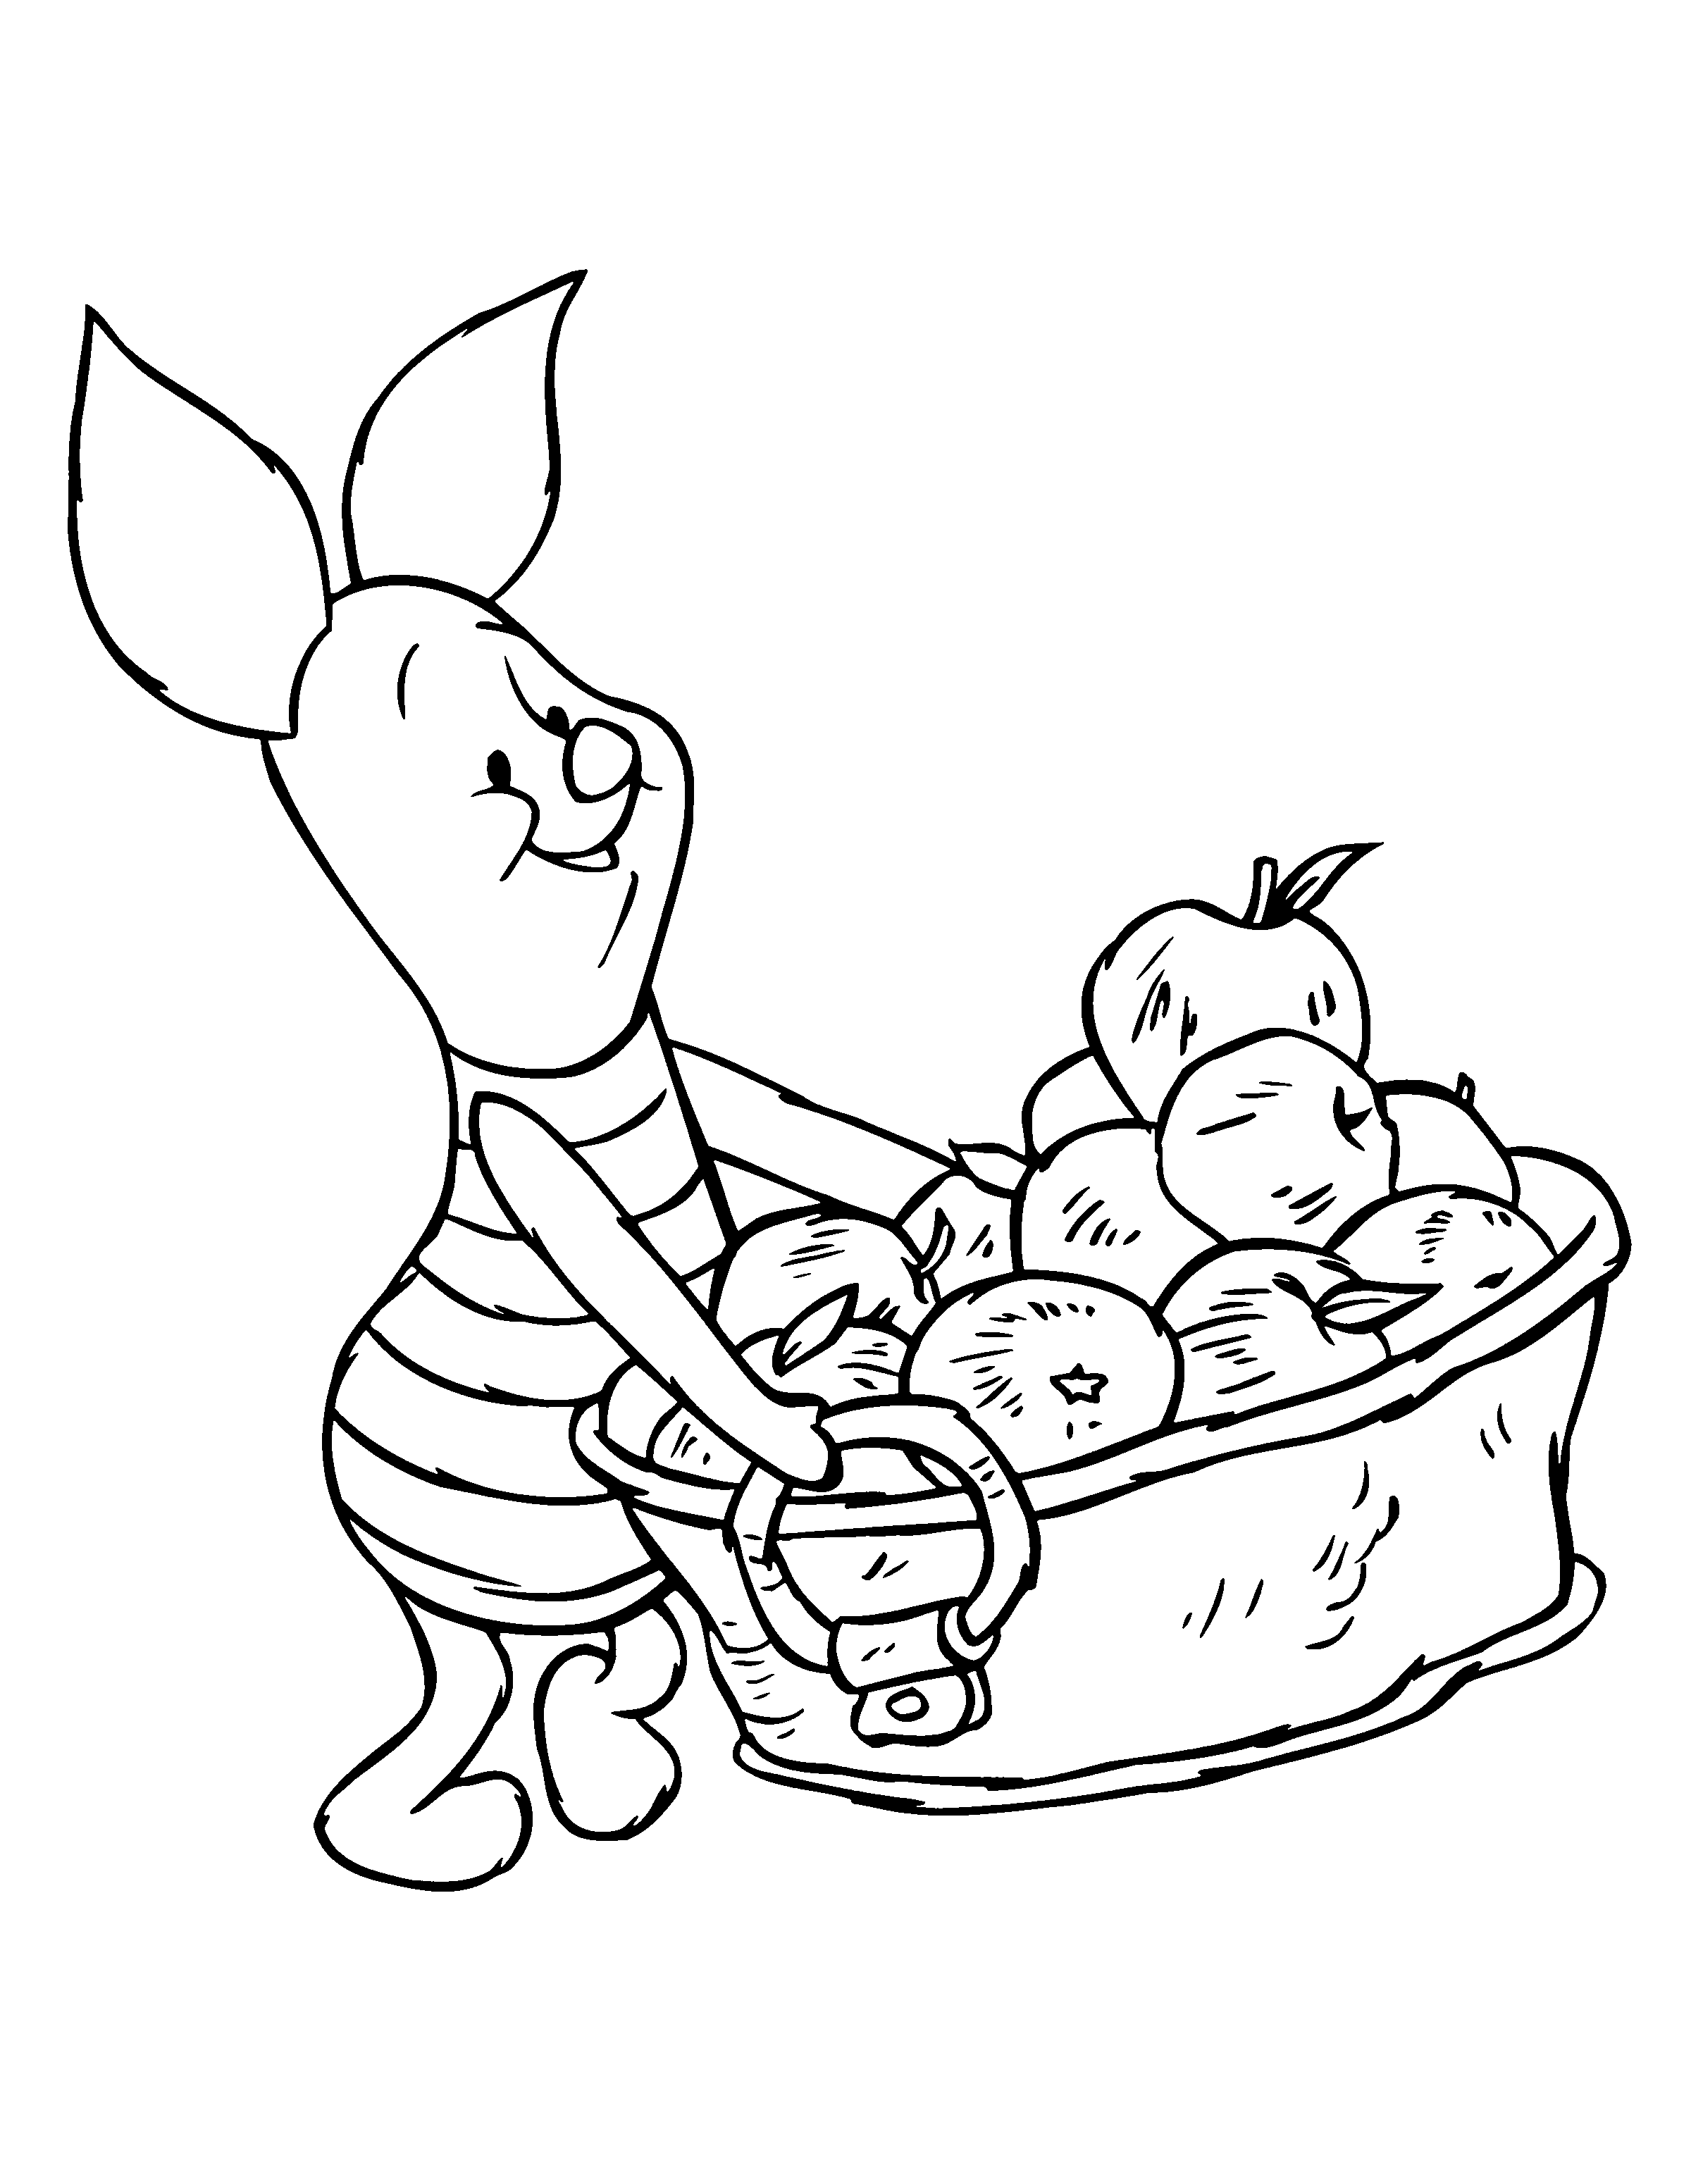 Piglet Harvesting Apples Coloring Pages